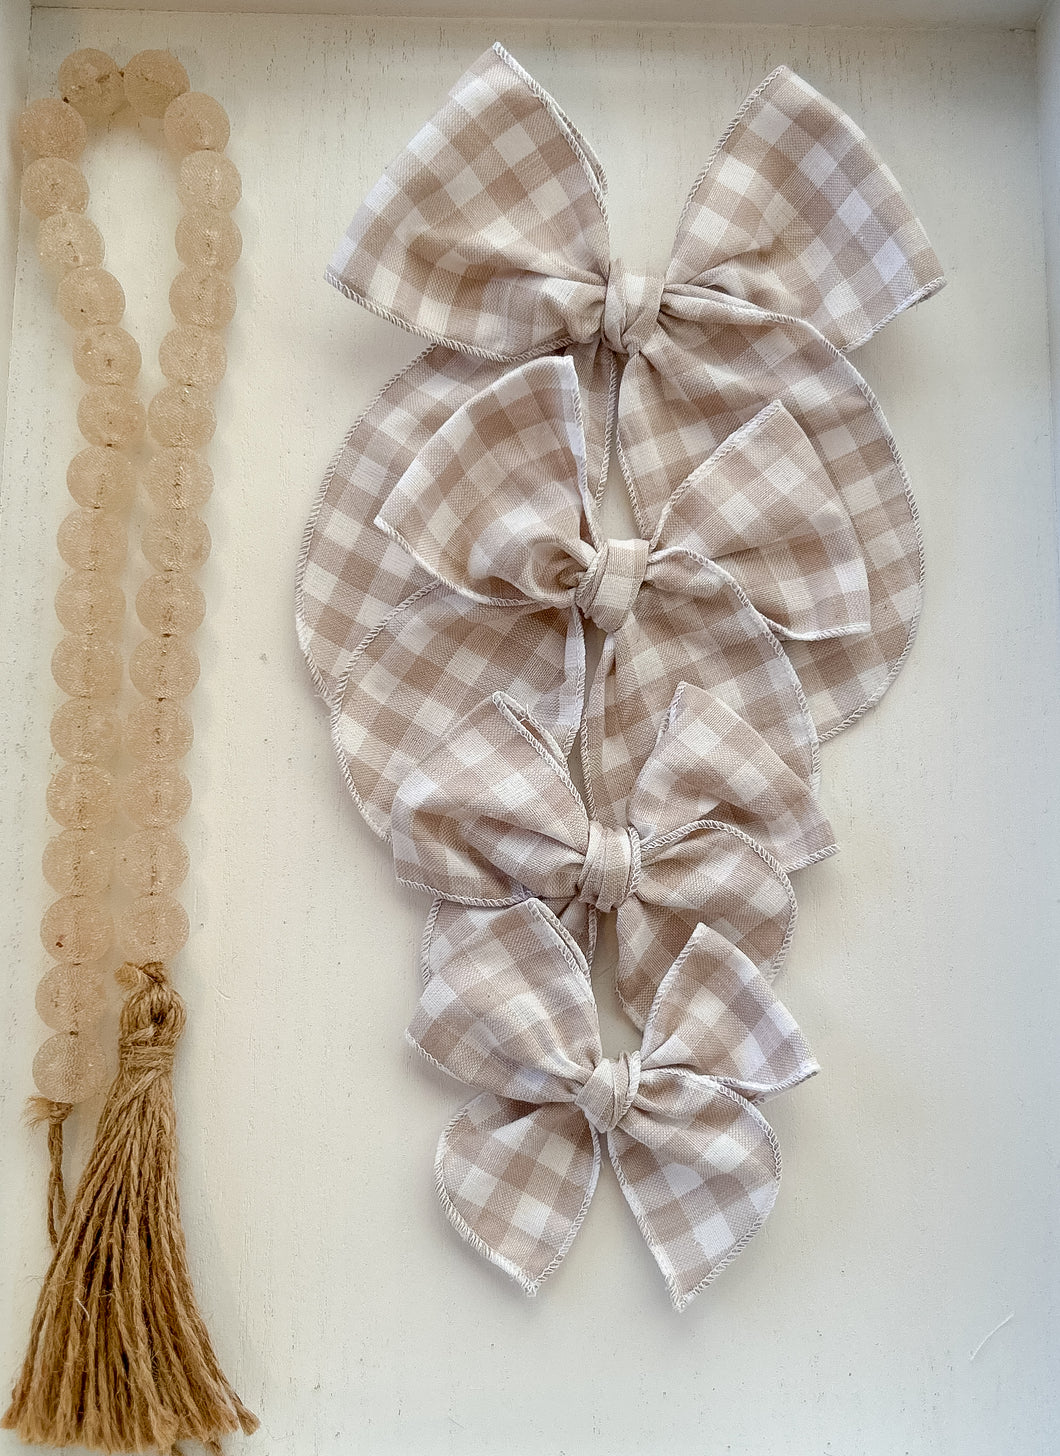 The Beige Gingham Wholesale Bow